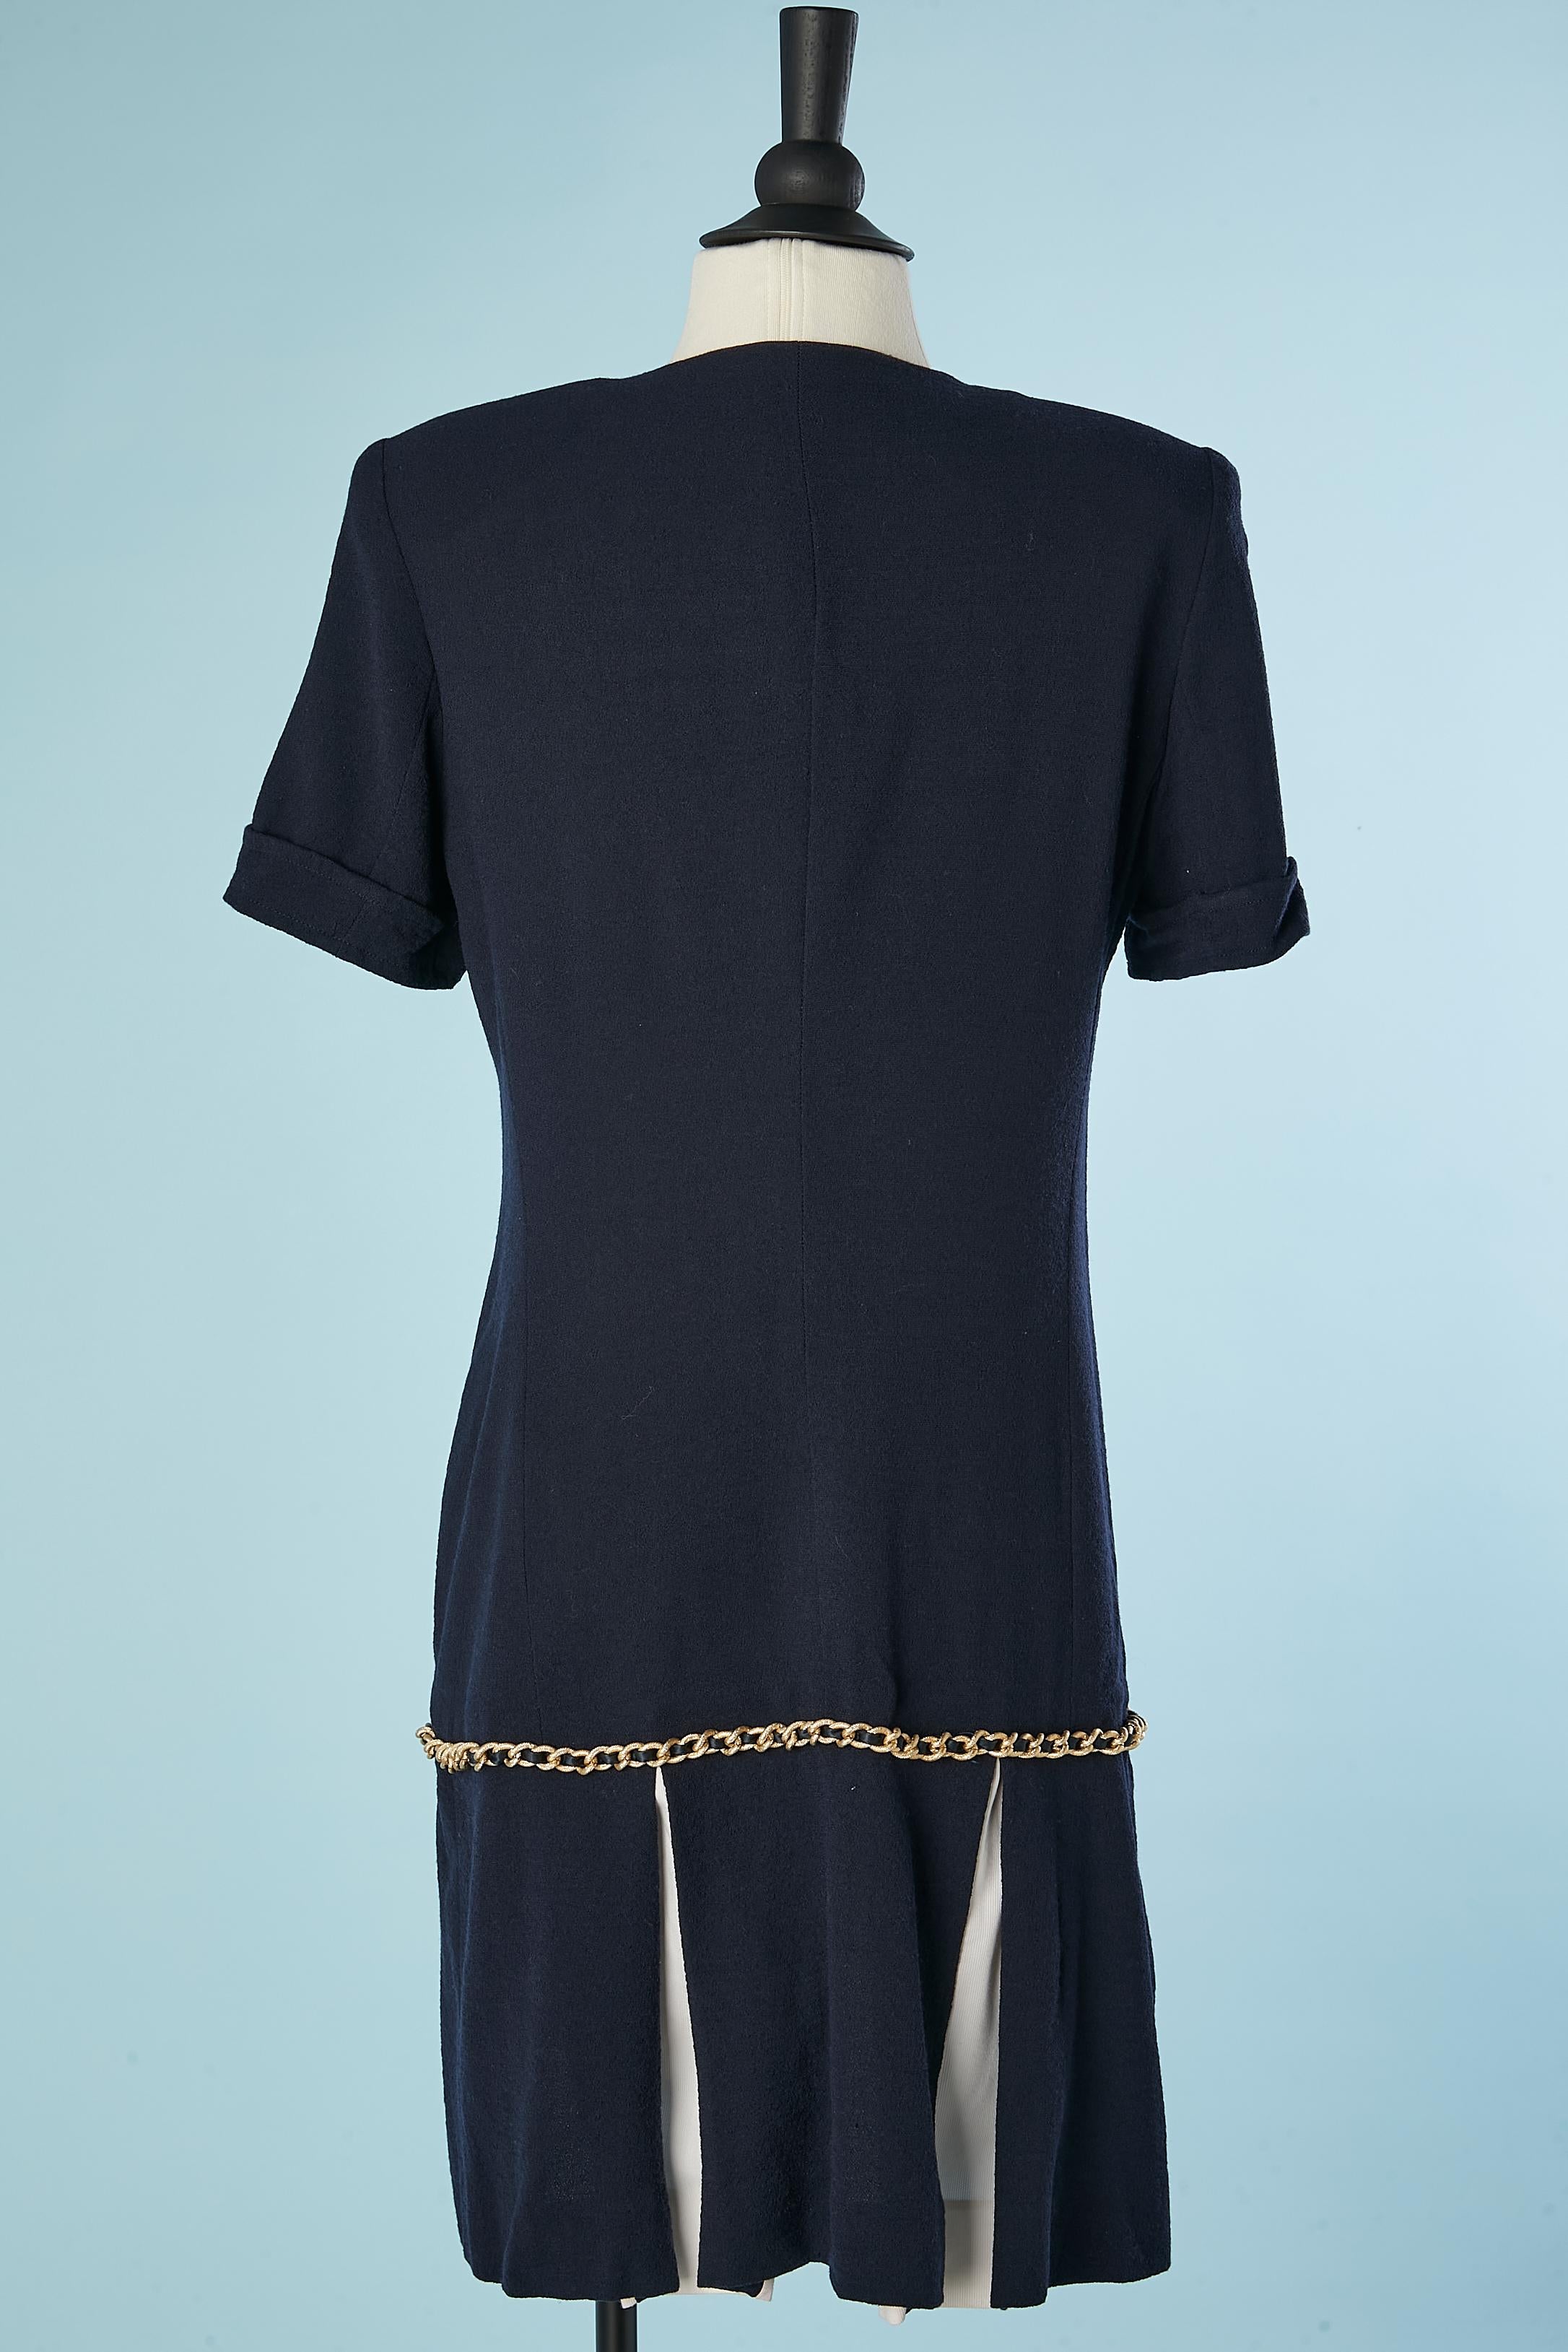 Navy blue crêpe cocktail dress with gold chain piping Versus Gianni Versace  For Sale 1